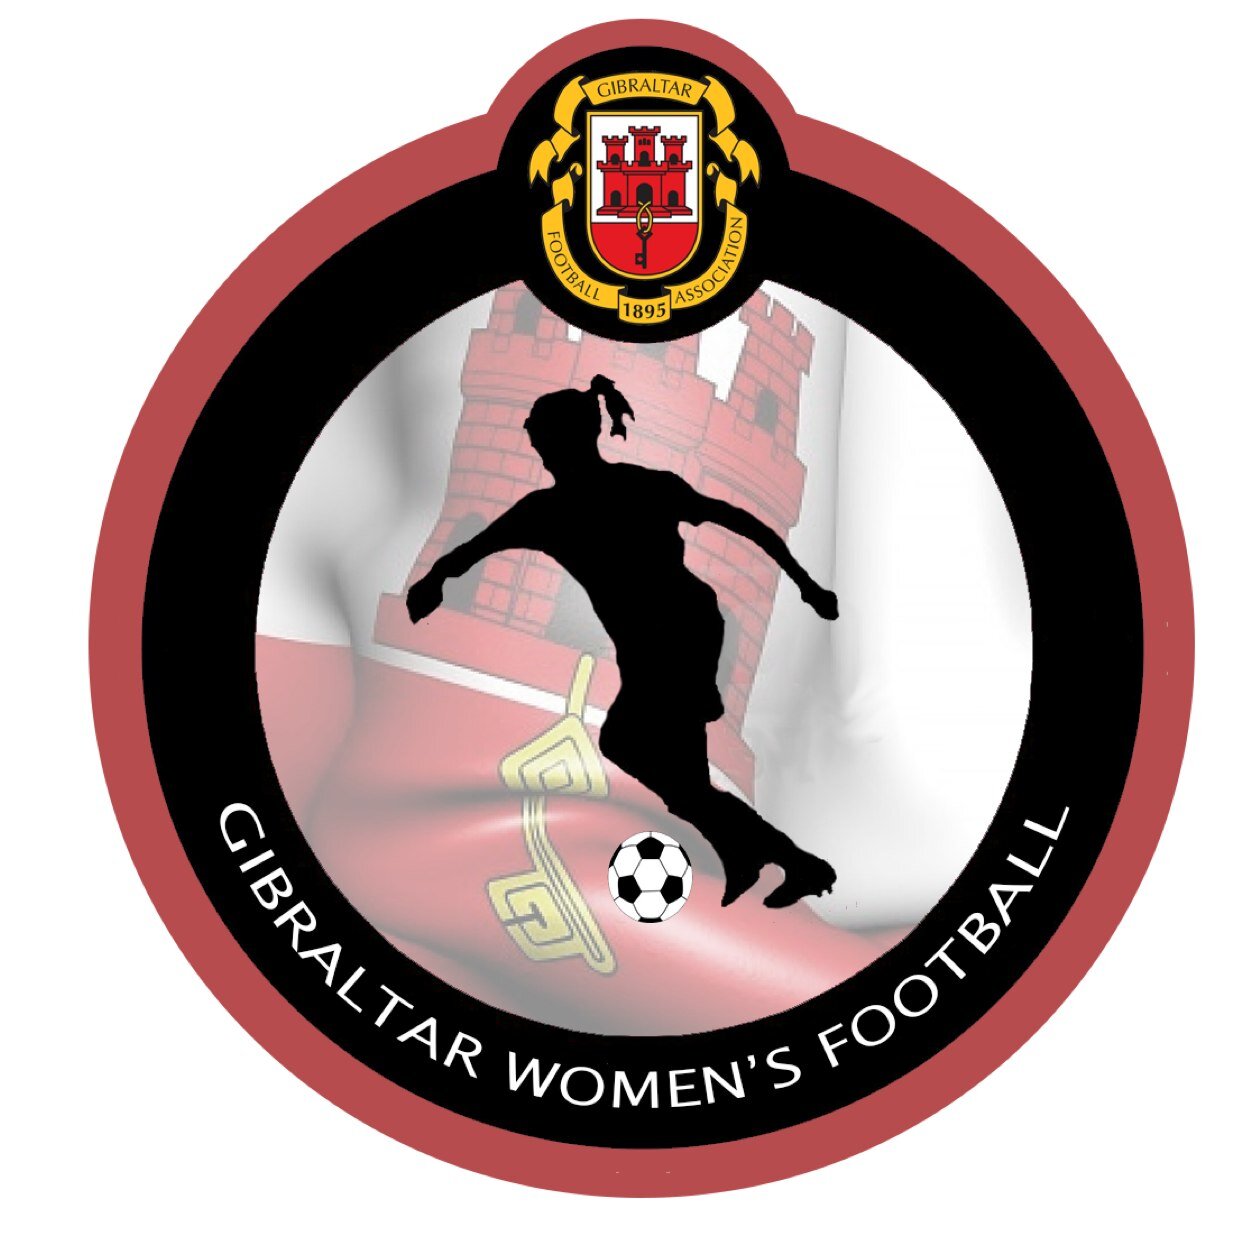 Official Twitter account of Womens Football in Gibraltar. http://t.co/4afsu6DL8Y